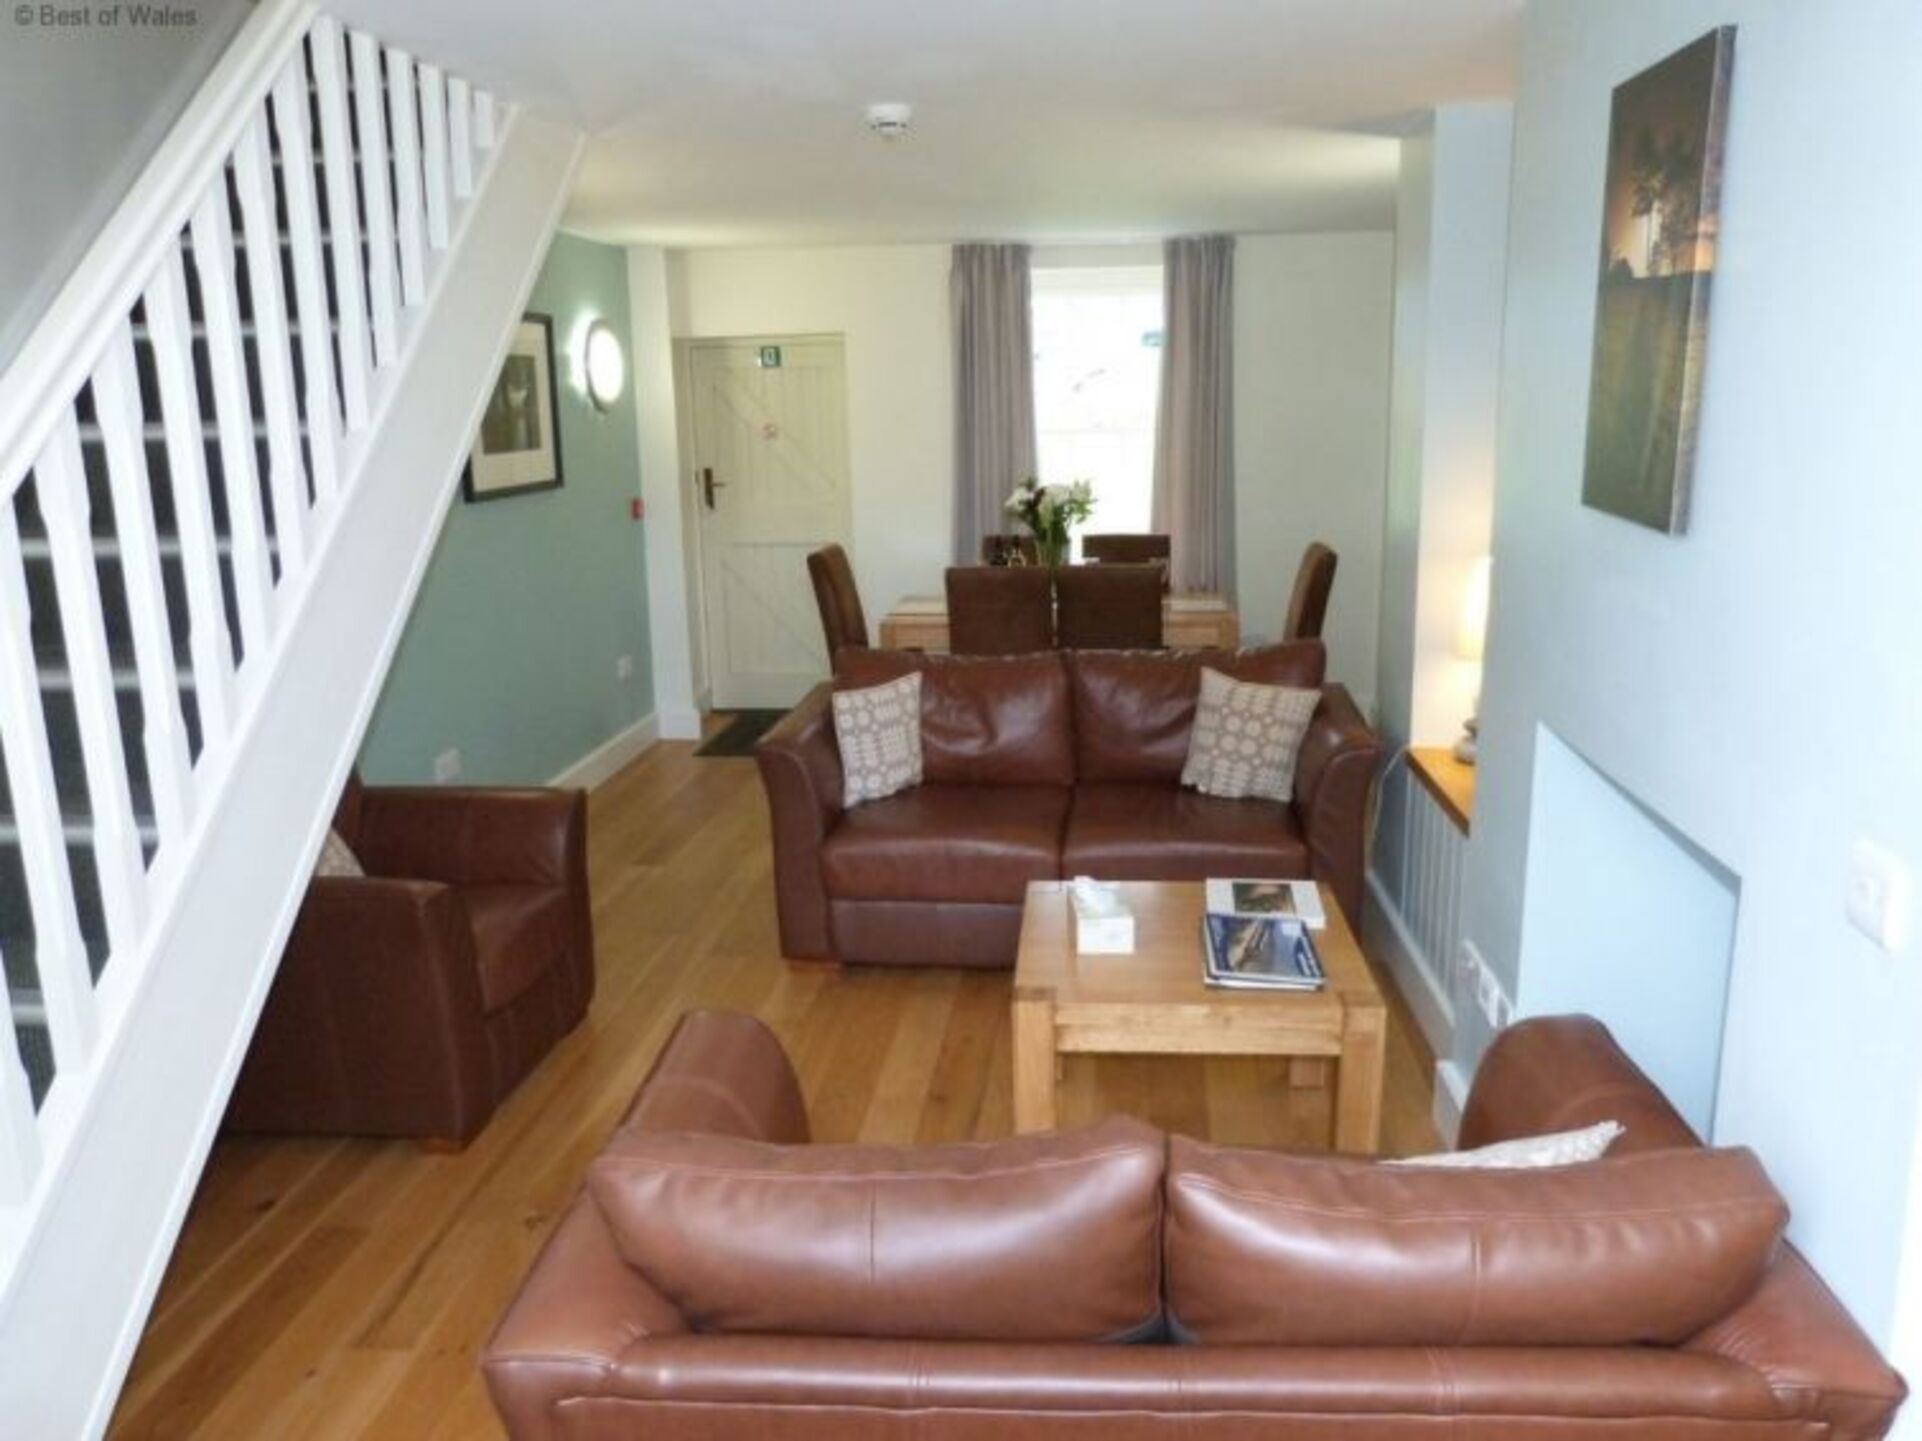 Property Image 2 - The Ultimate Villa in an Ideal Location, Wales Villa 1036